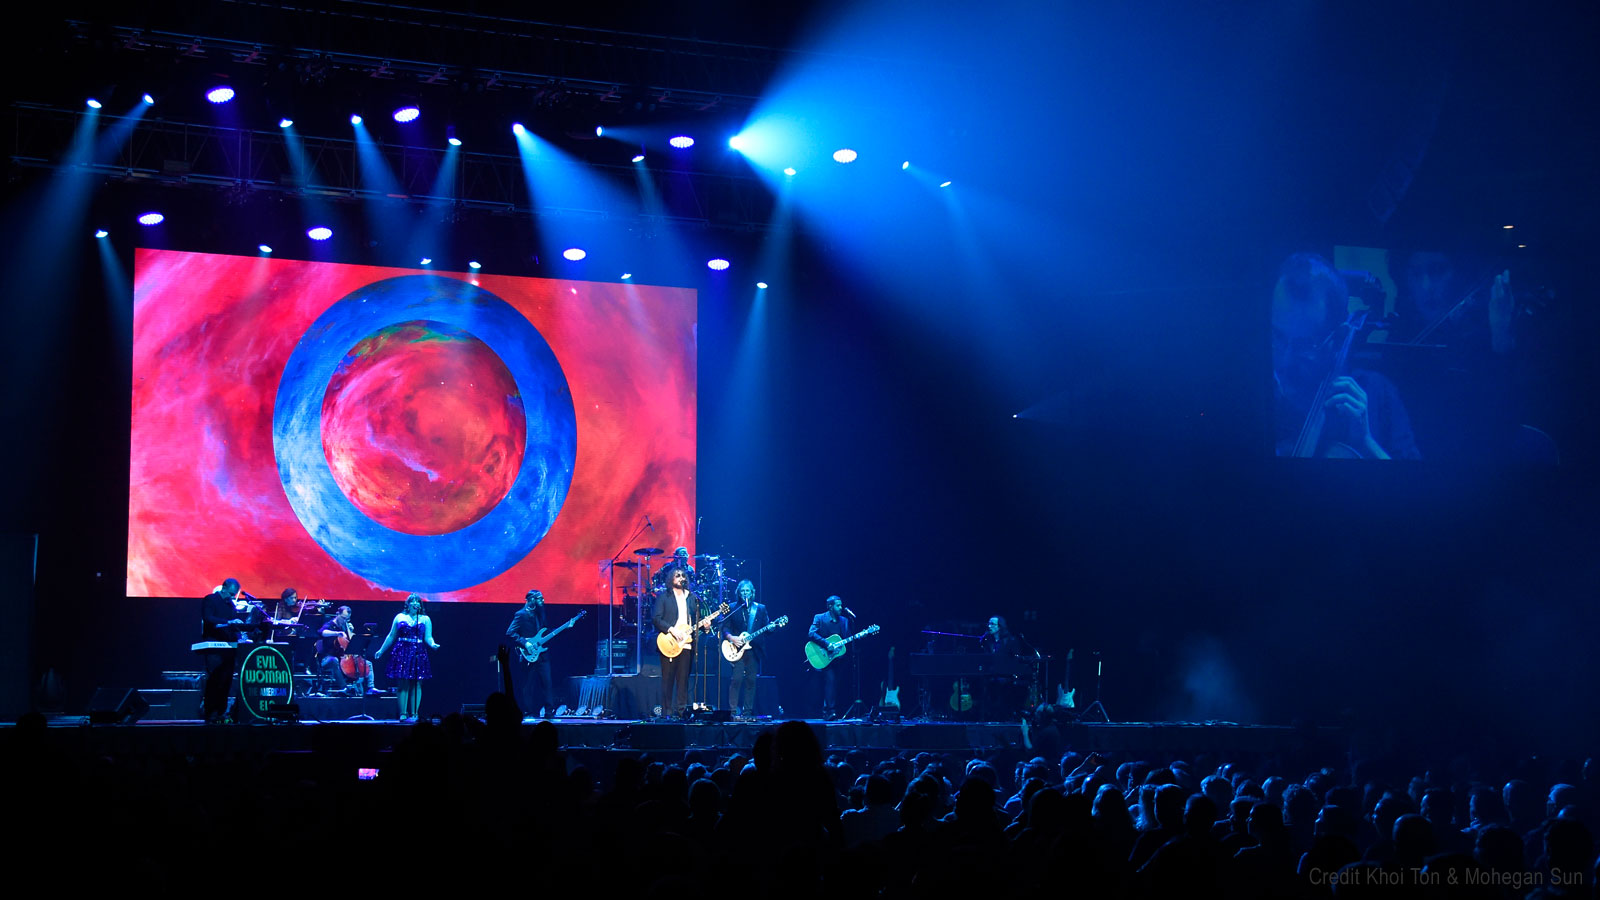 Band members of The American ELO perform in front of a giant O projection.